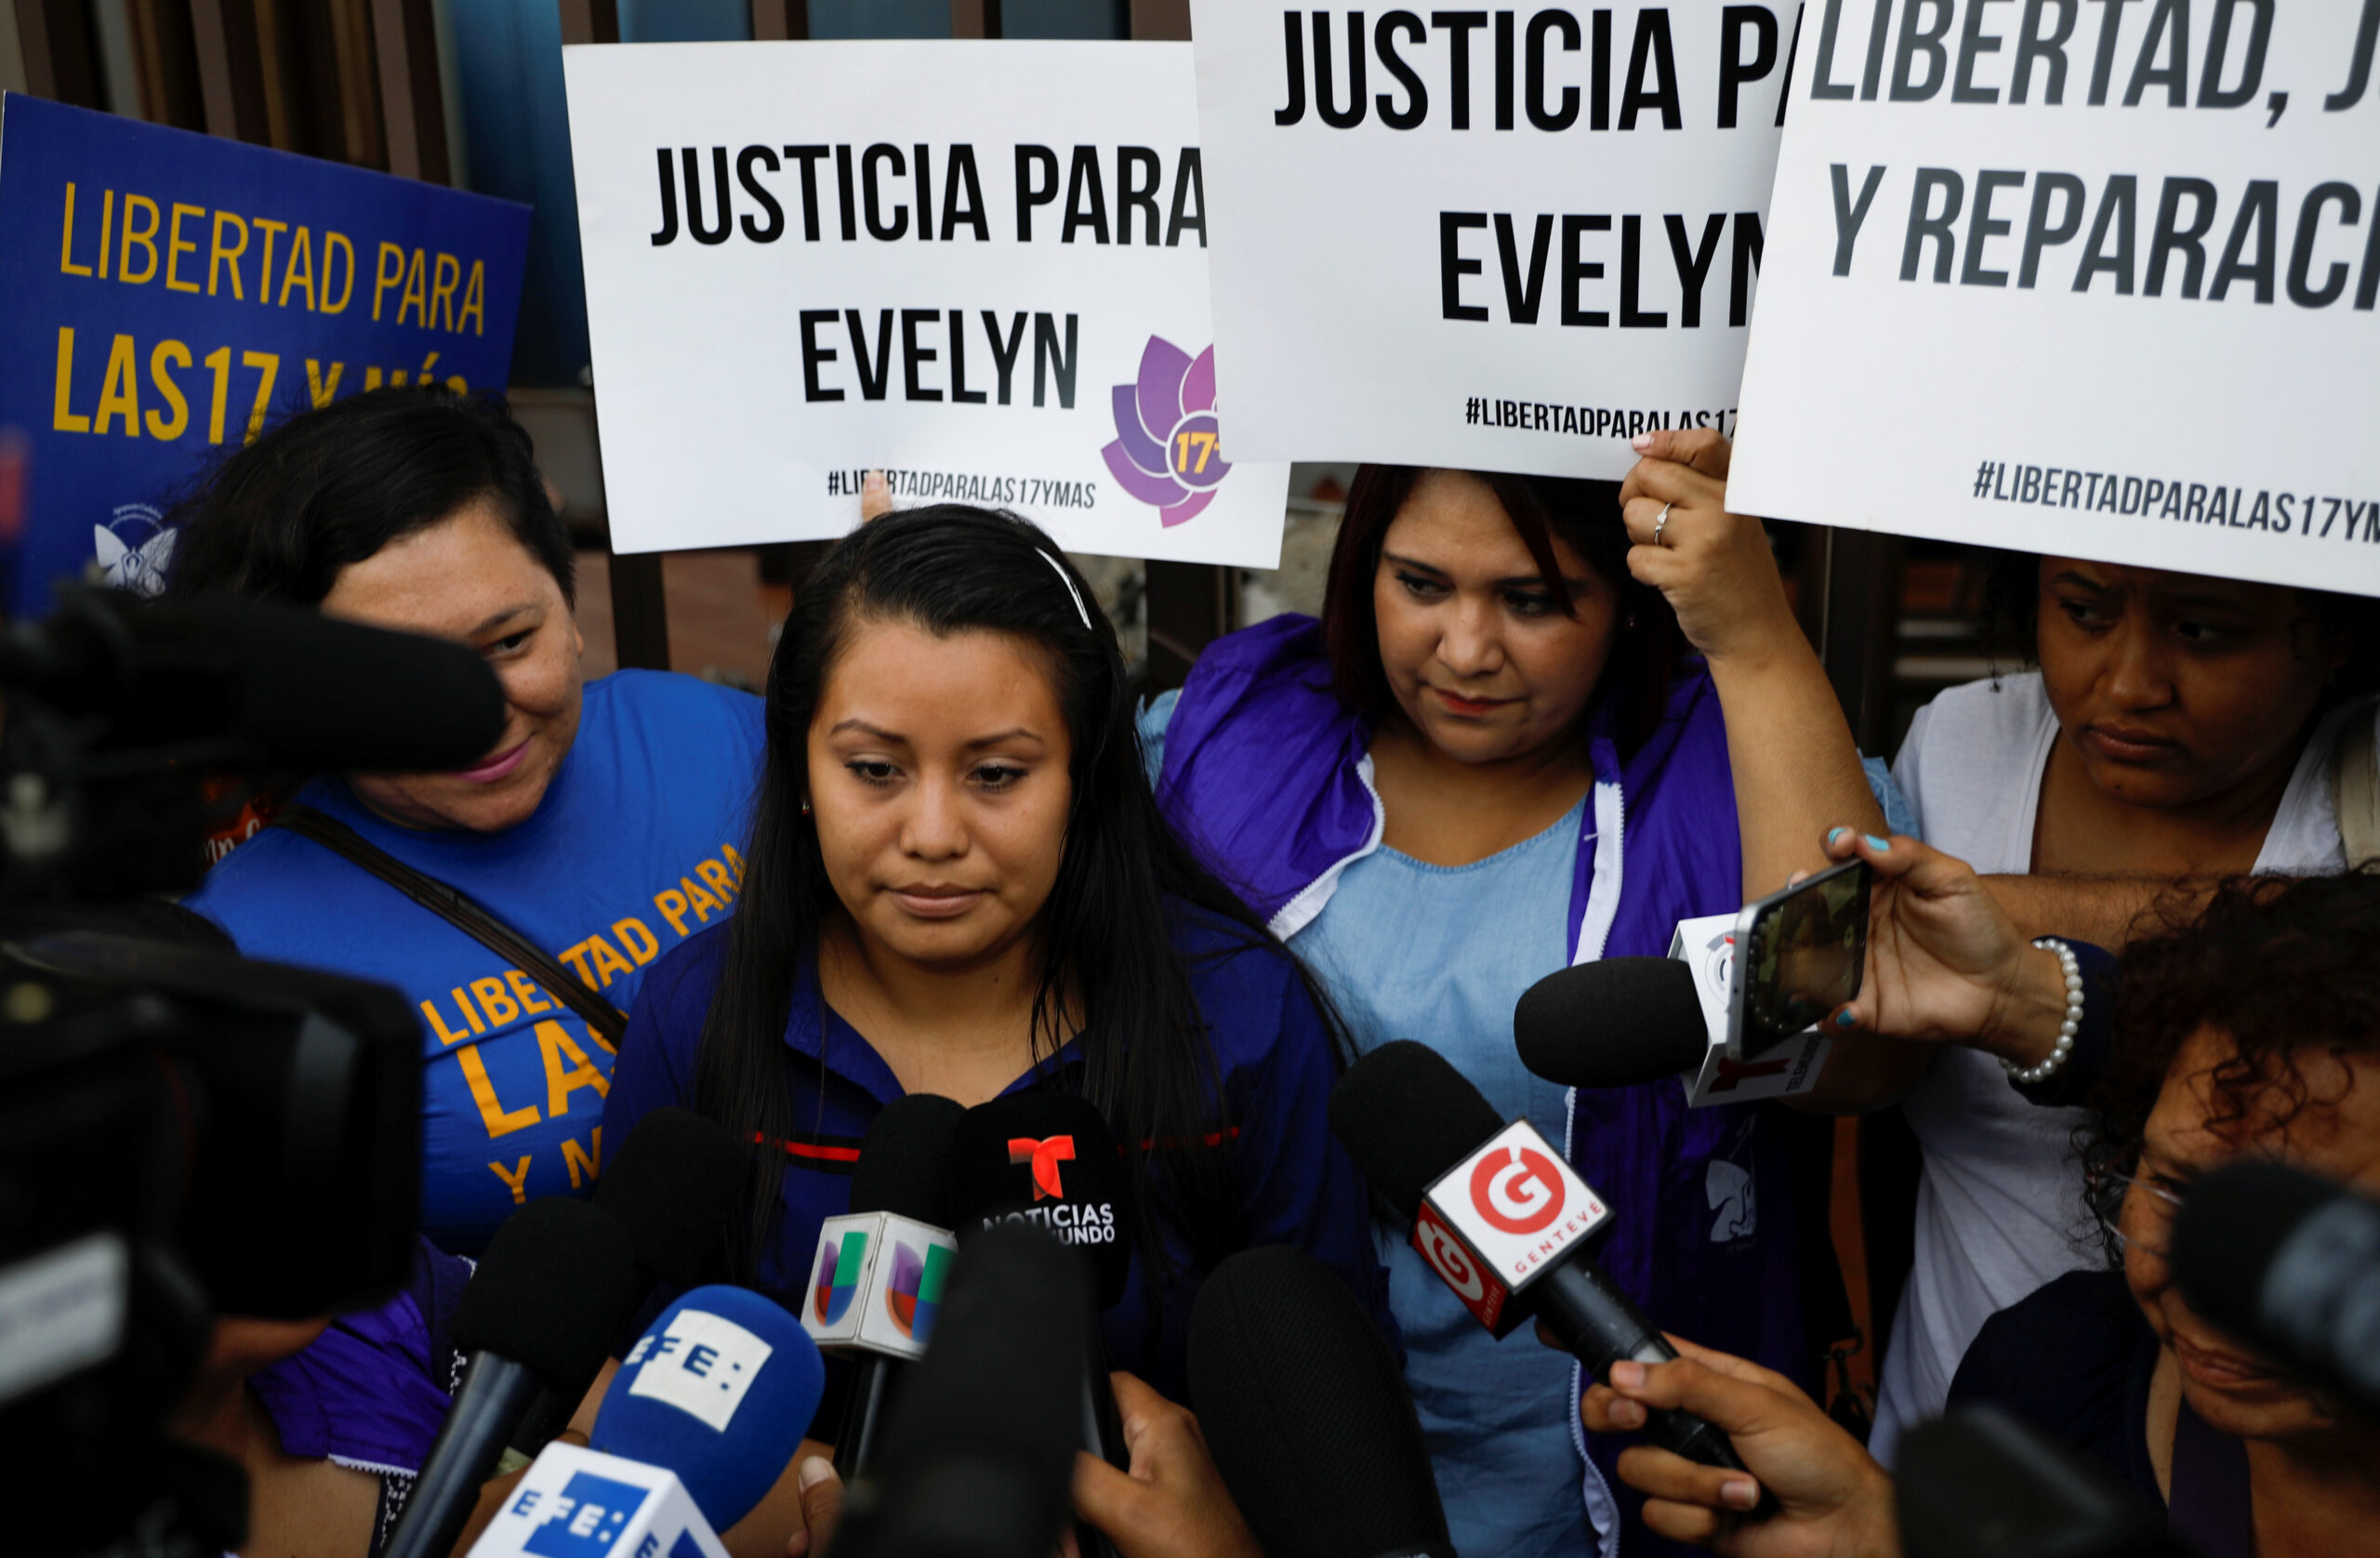 Evelyn Hernandez, who was sentenced to 30 years in prison for a suspected abortion, speaks to the media as she arrives for a hearing in Ciudad Delgado, El Salvador July 15, 2019. Placards read "Justice for Evelyn".